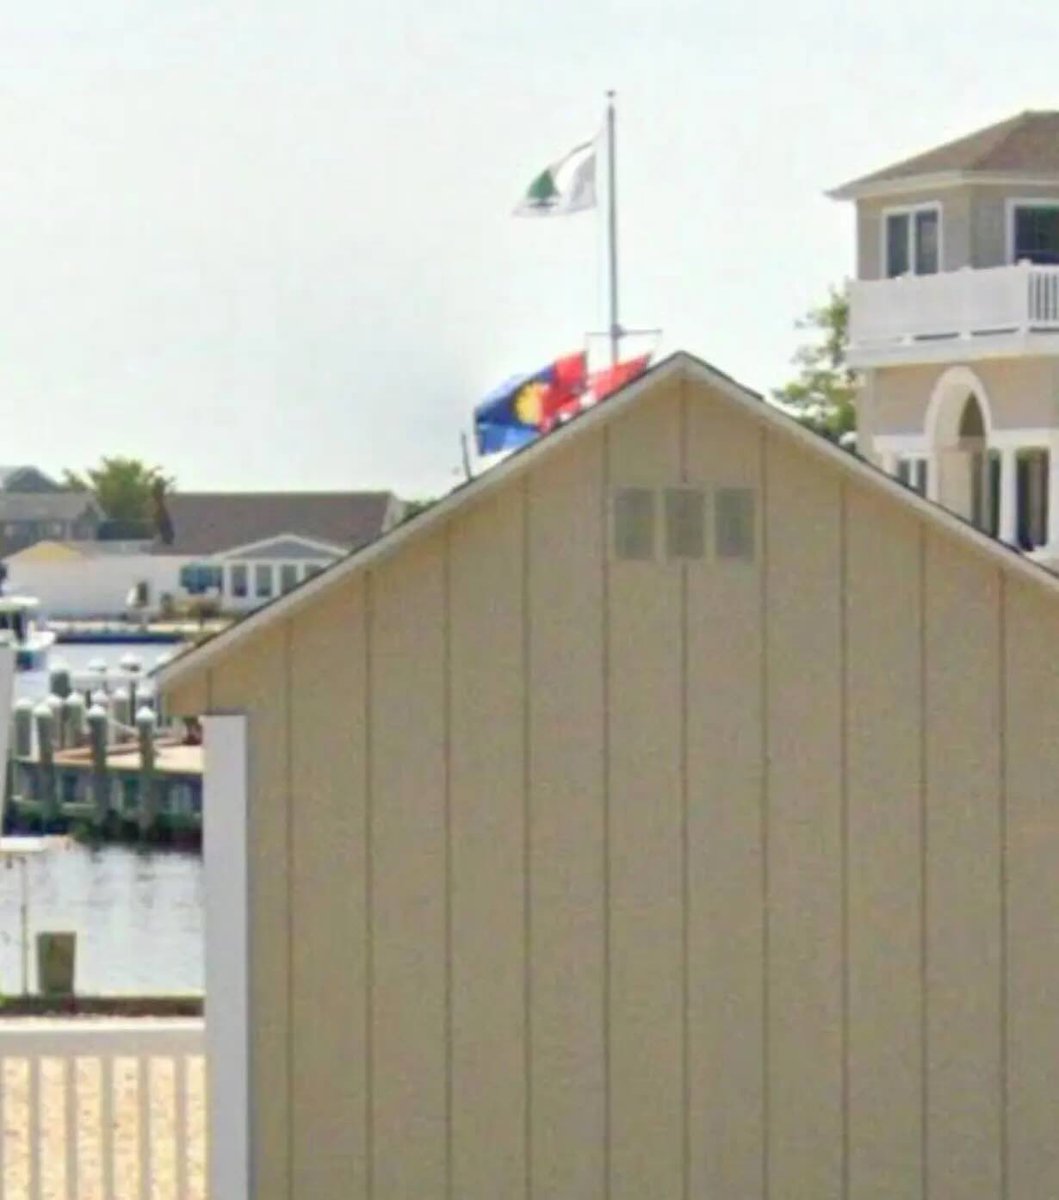 Holy Shit!!! Here is Justice Samuel Alito's vacation home flying the 'Appeal to Heaven' flag, a banner favored by election deniers. Is he going to blame his wife again?